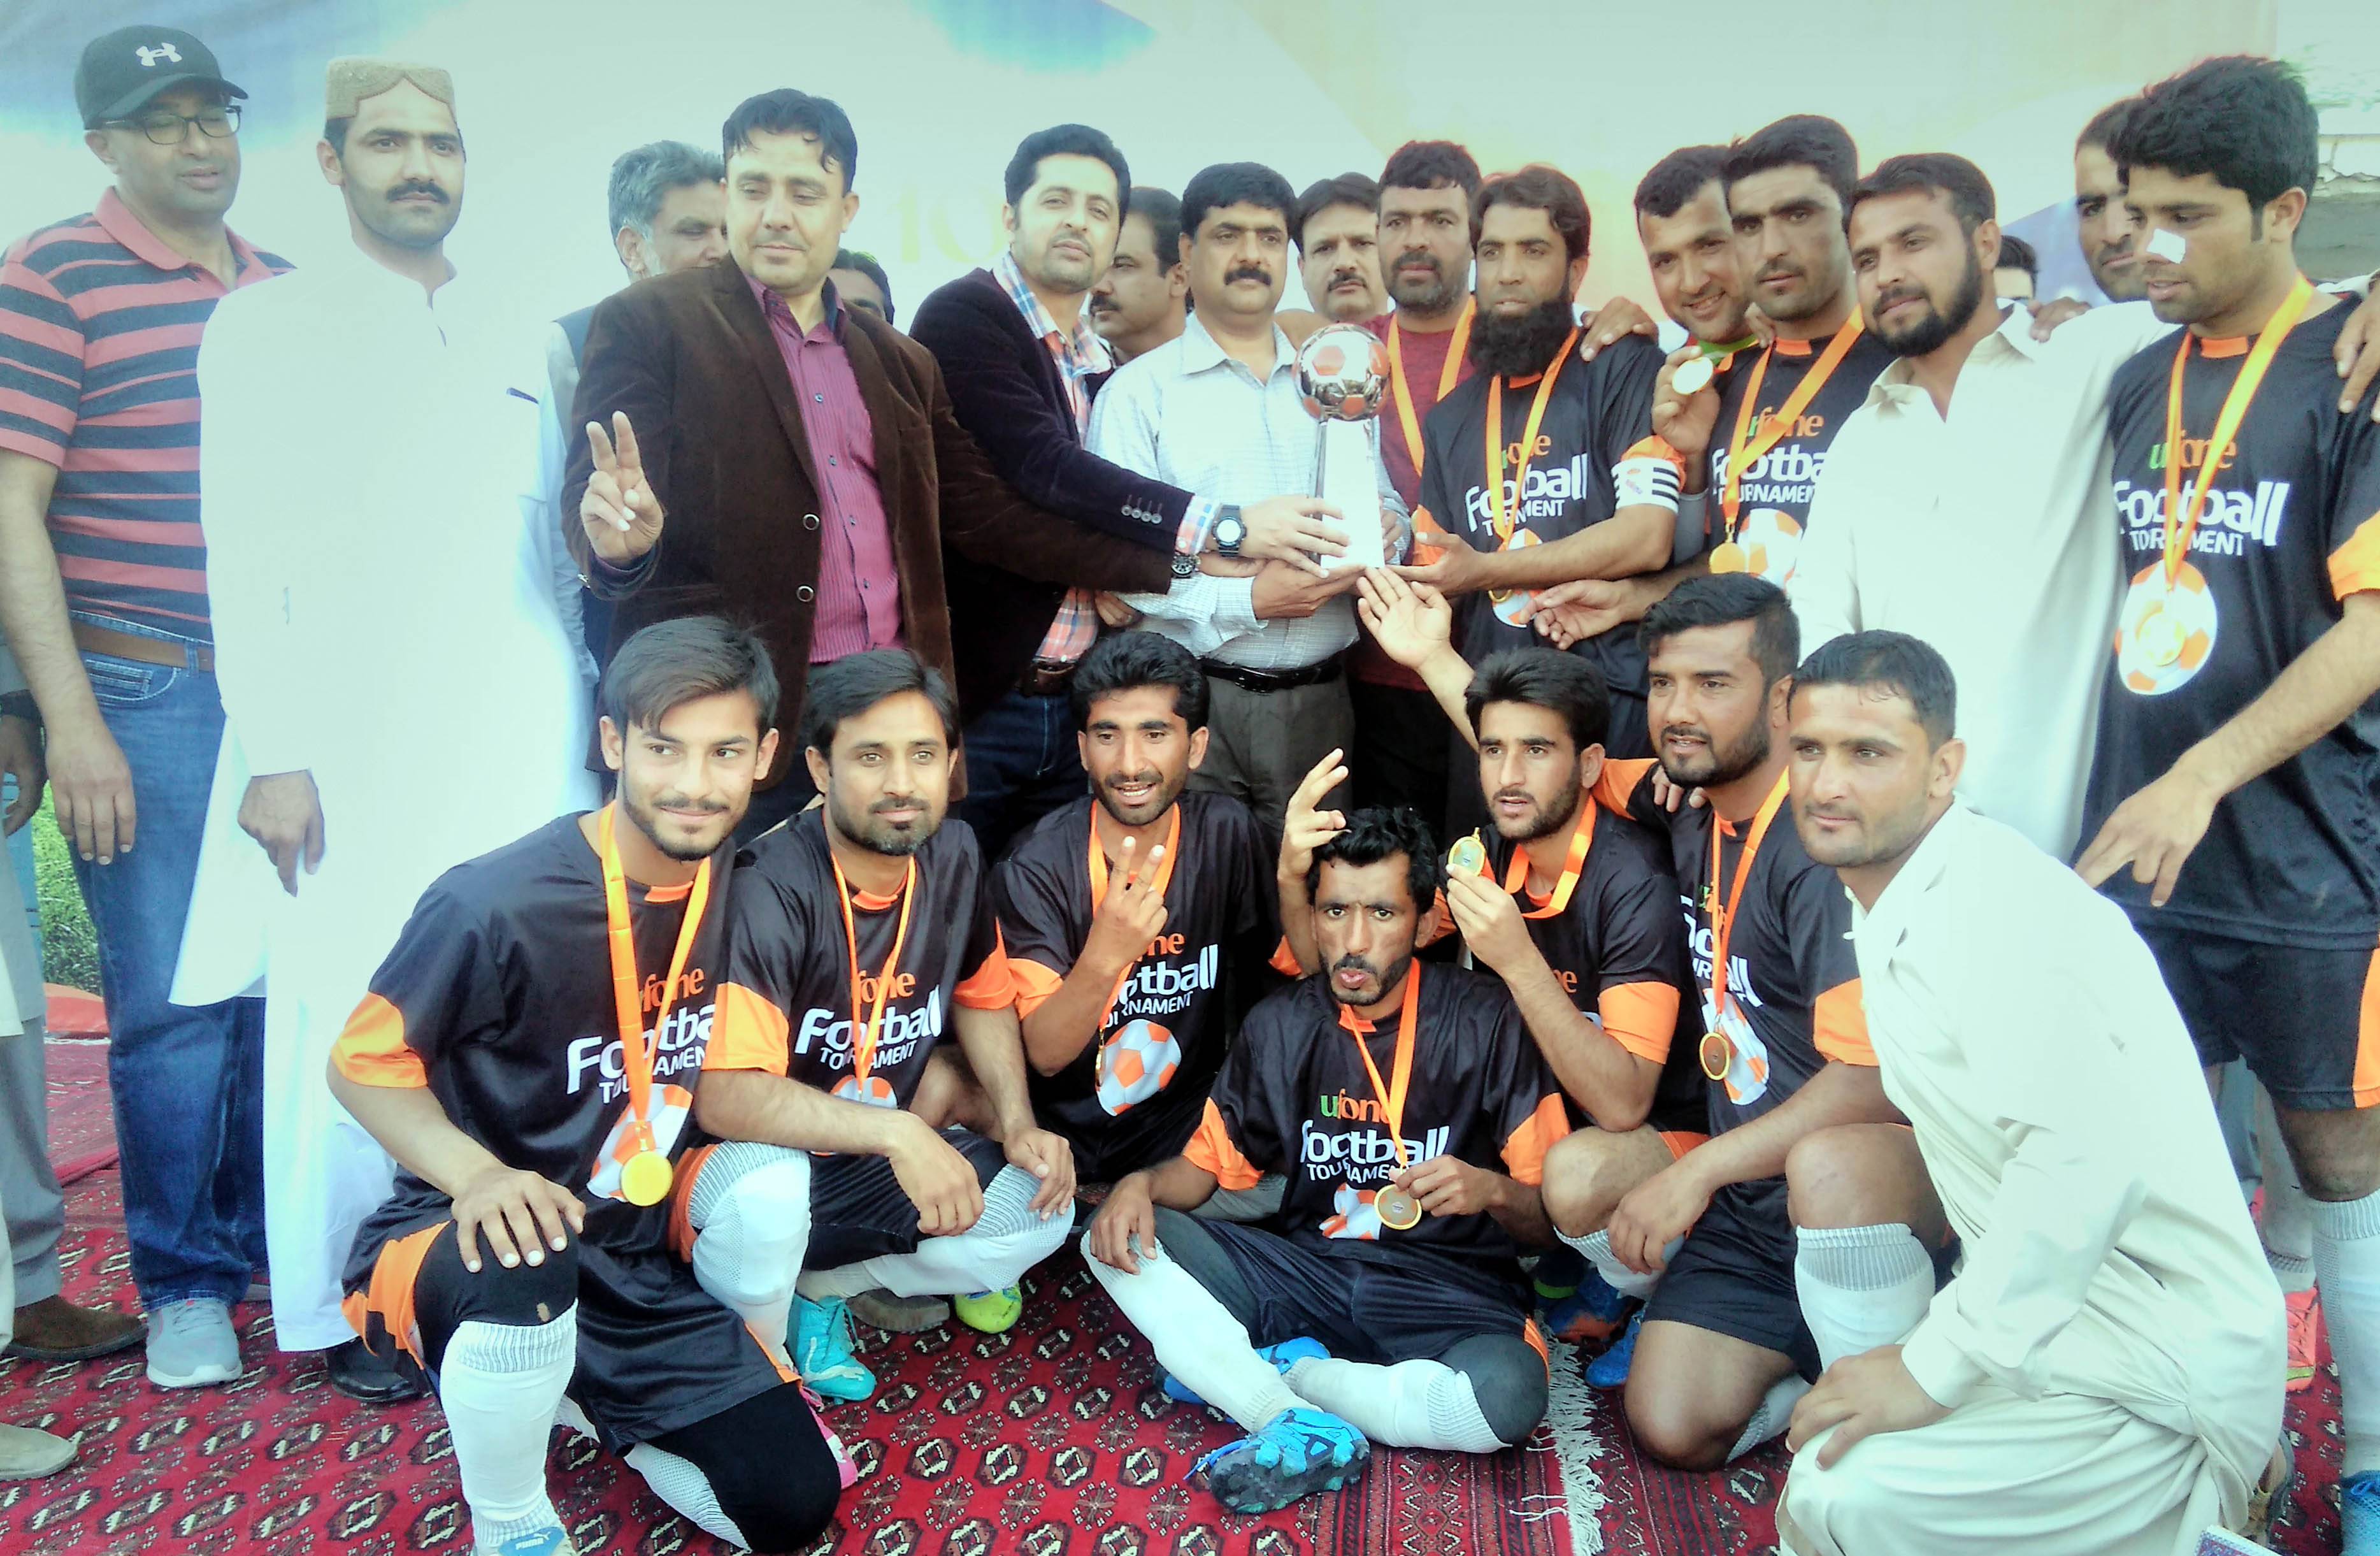 Ufone Balochistan Football Cup: A determination to promote football in Balochistan